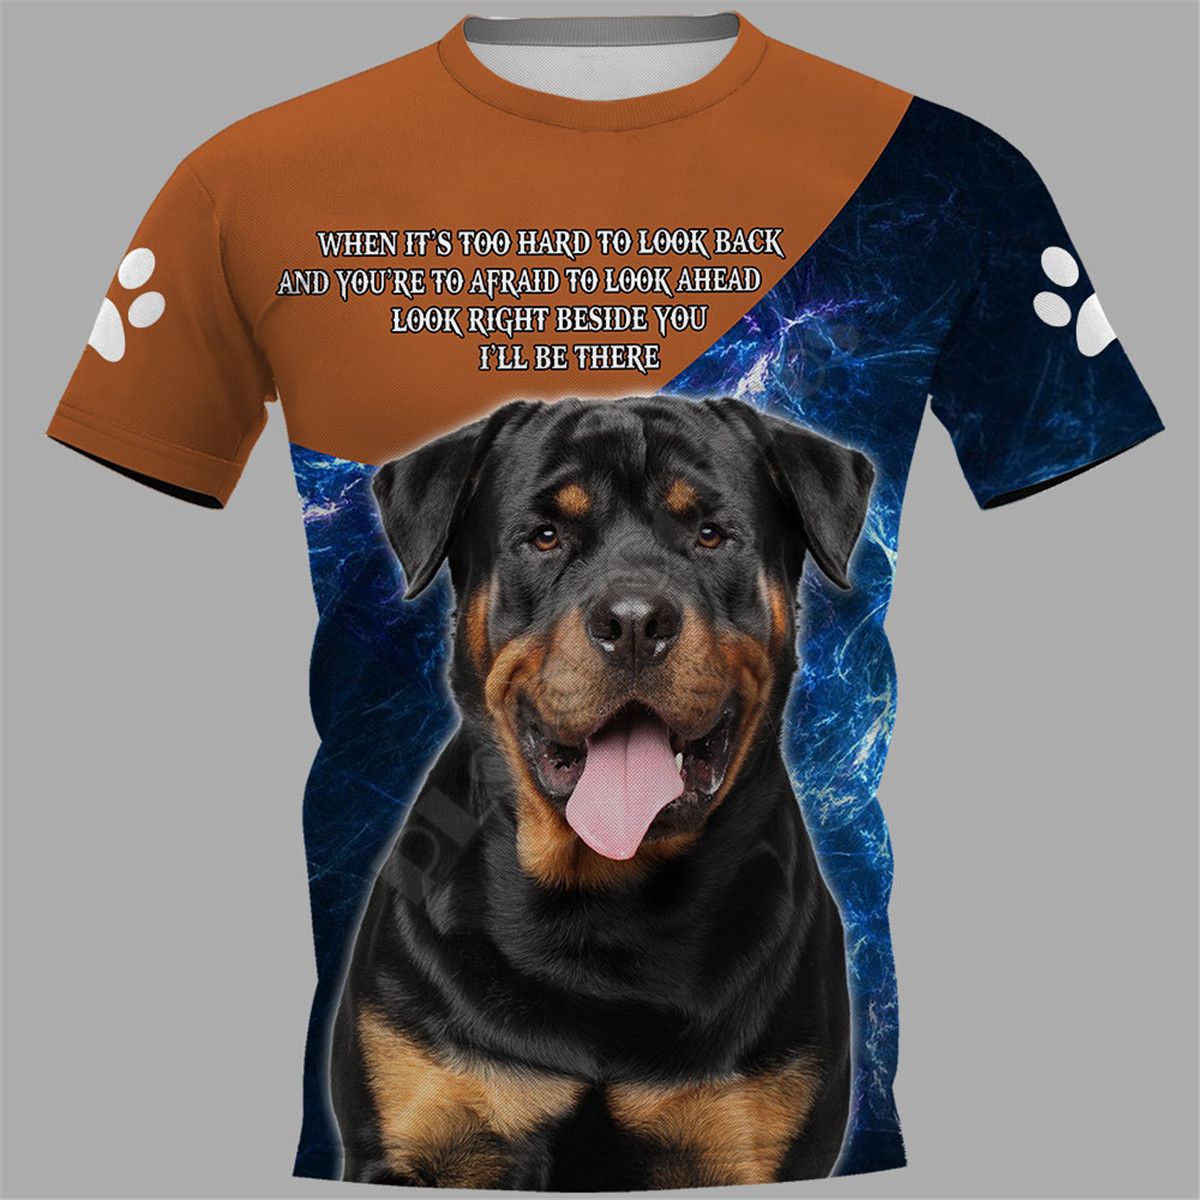 Leonberger-3D-Printed-t-shirts-women-for-men-Summer-Casual-Tees-Short-Sleeve-T-shirts-Funny-4.jpg